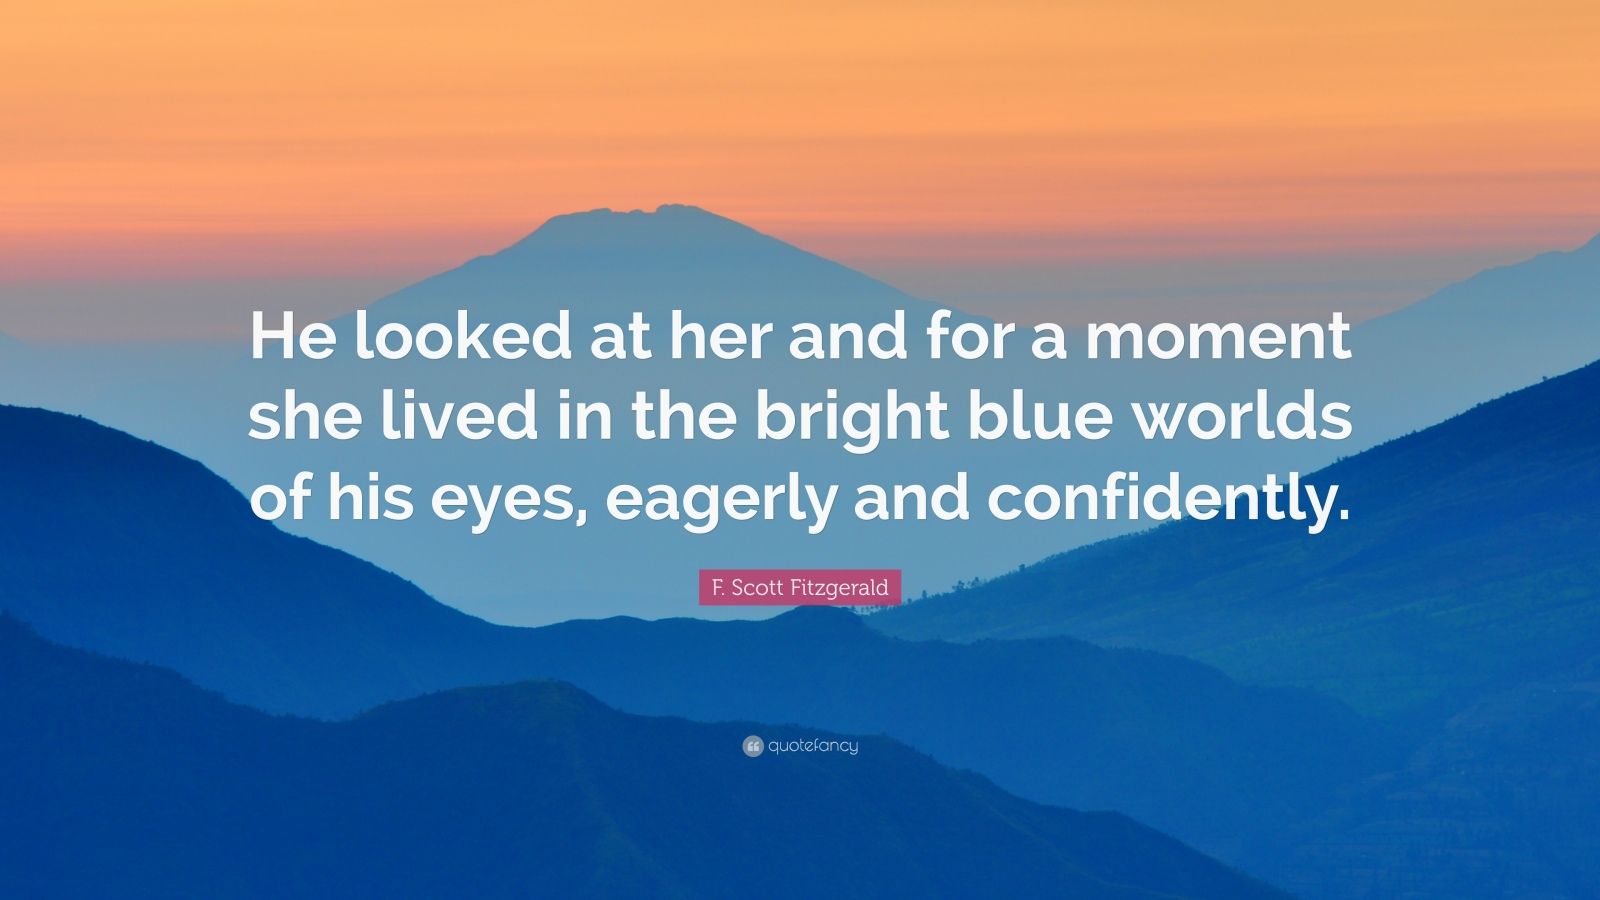 F. Scott Fitzgerald Quote: “He looked at her and for a moment she lived ...